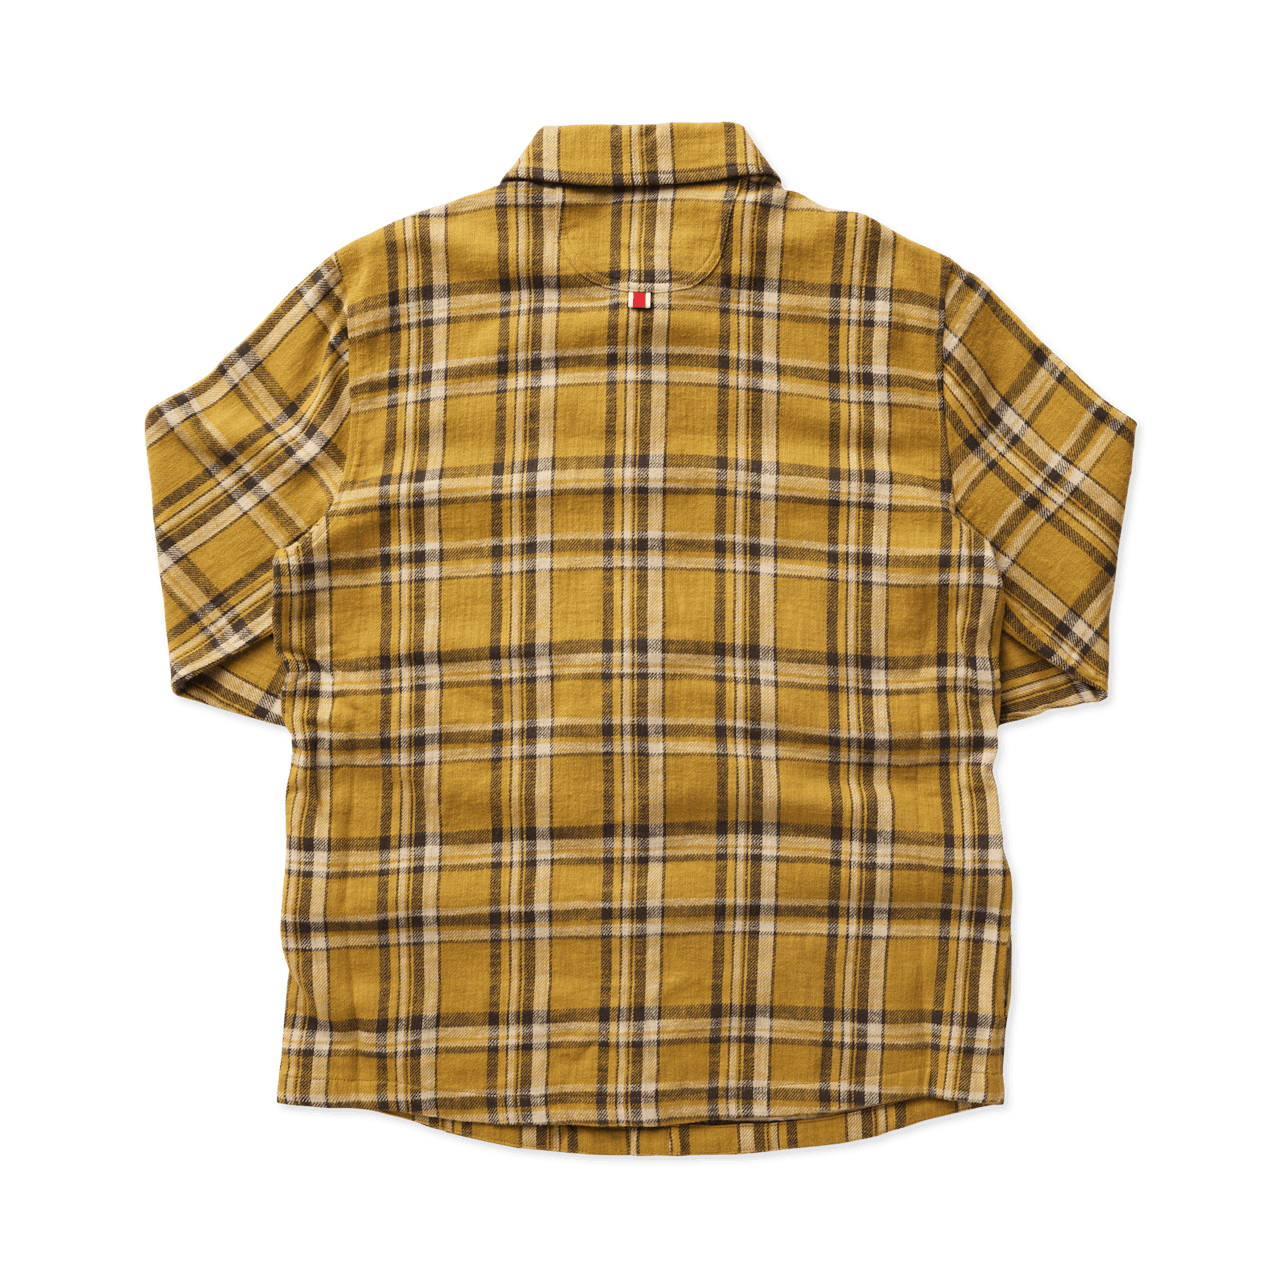 New England Flannel